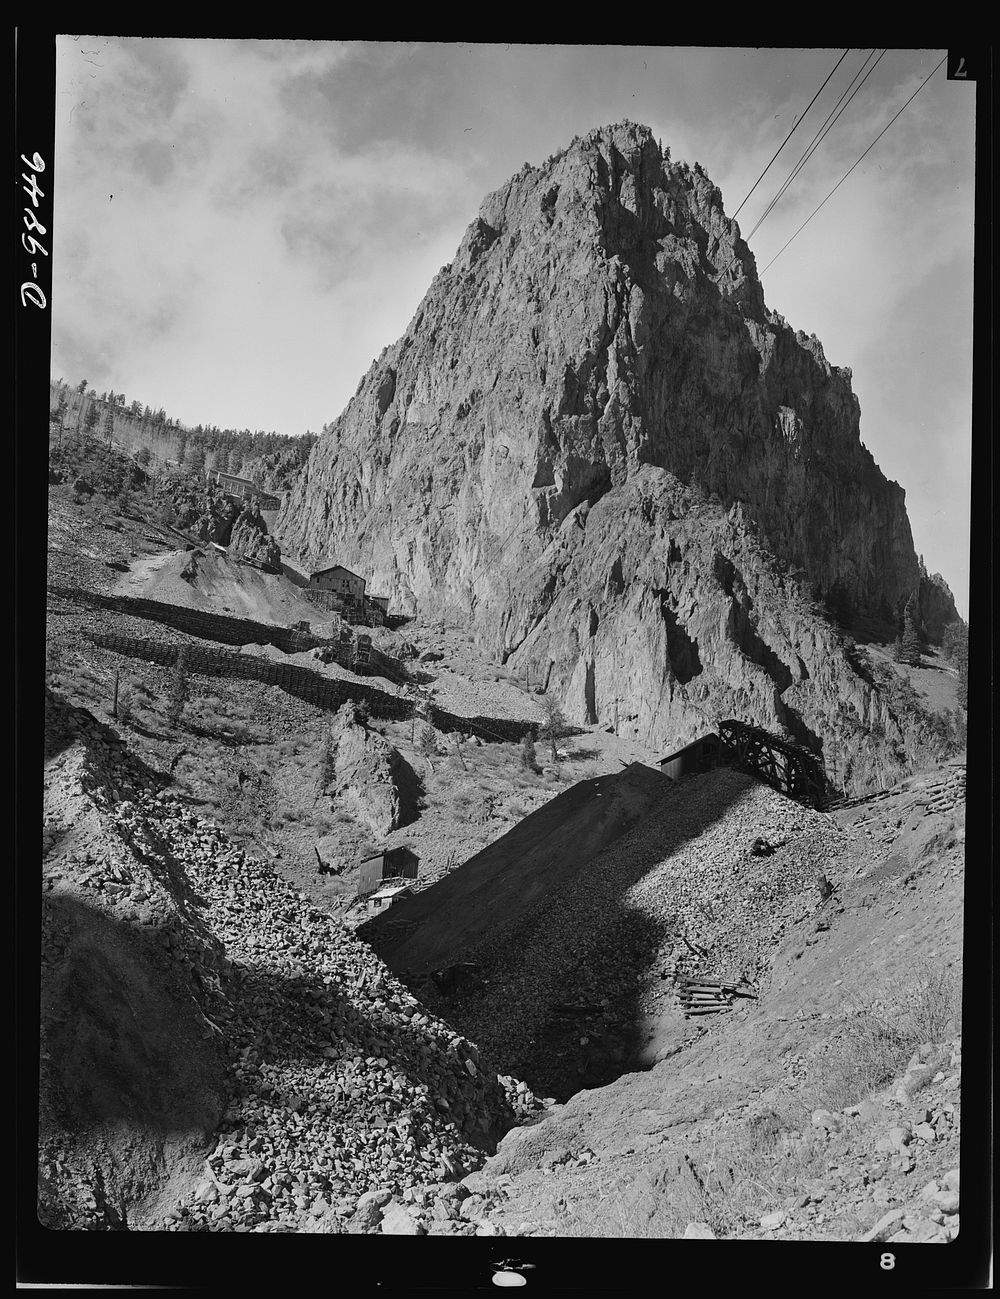 Production. Lead. Typical country near Creede, Colorado in which old lead mines have been reopened. Creede, for many years a…